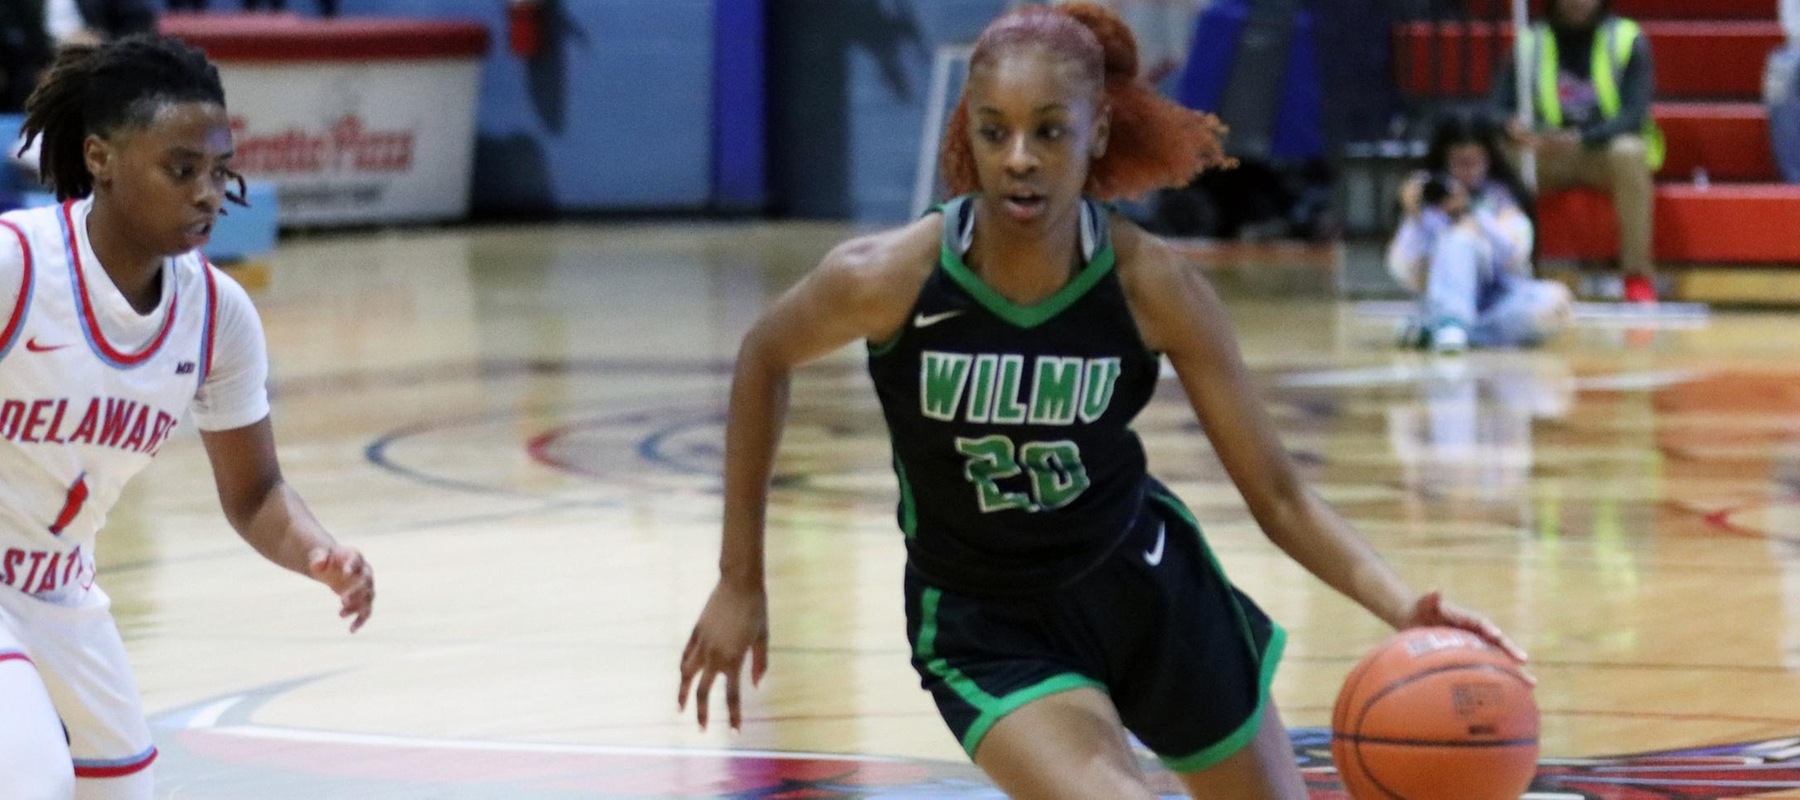 File photo of Trinity Brittingham who led the Wildcats with 12 points at George Washington. Copyright 2022; Wilmington University. All rights reserved. Photo by Dan Lauletta. November 15, 2022 at Delaware State University.